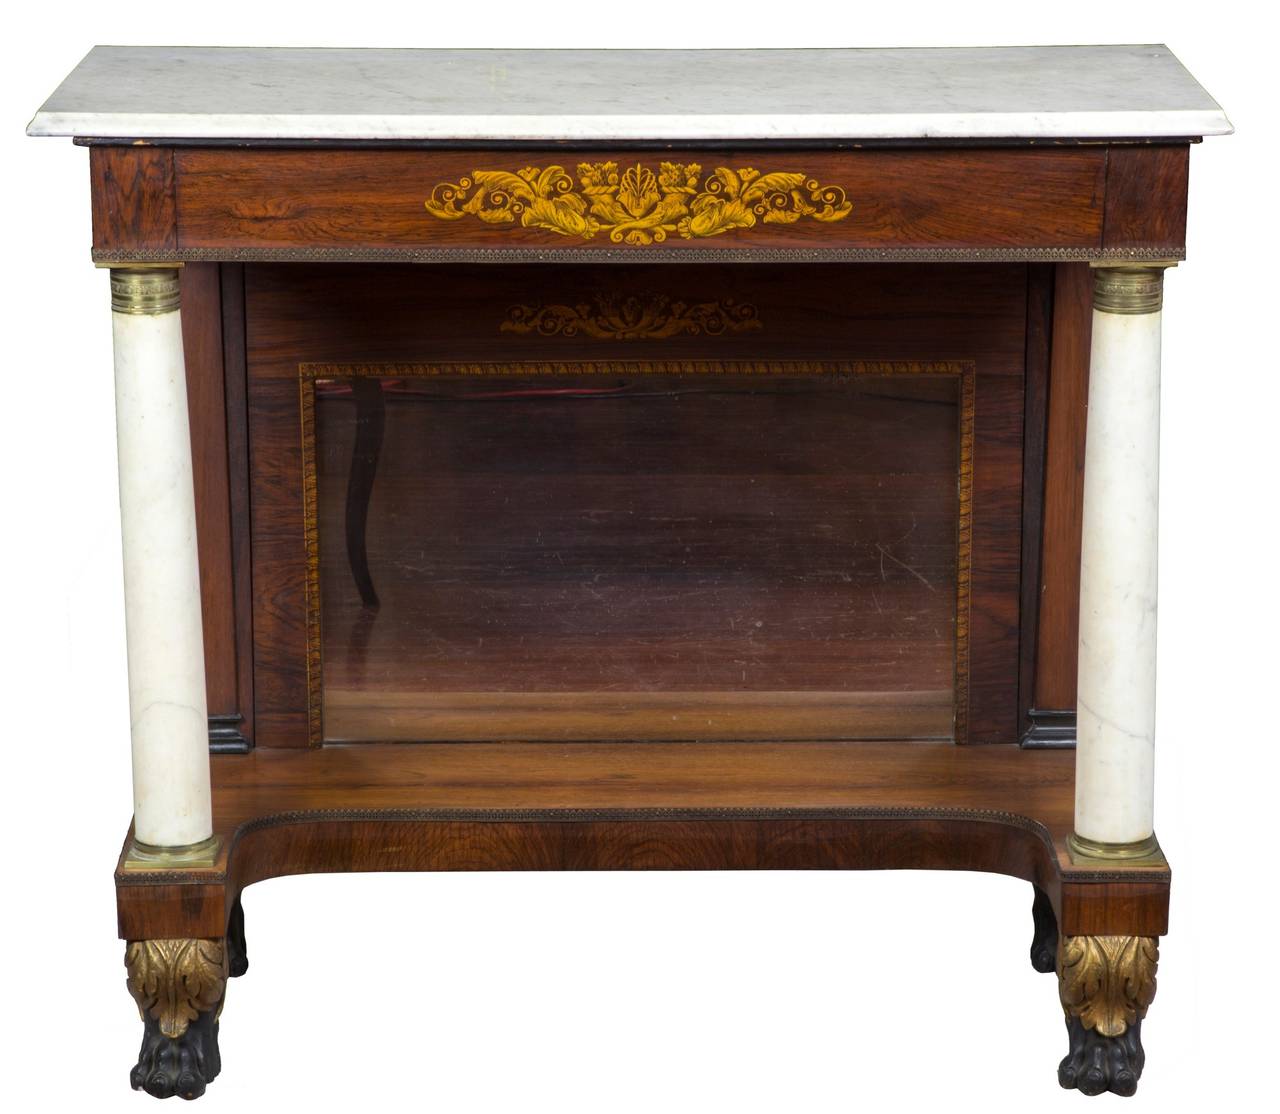 Brass Rosewood Stenciled Pier Table with Marble Columns, New York, 1830